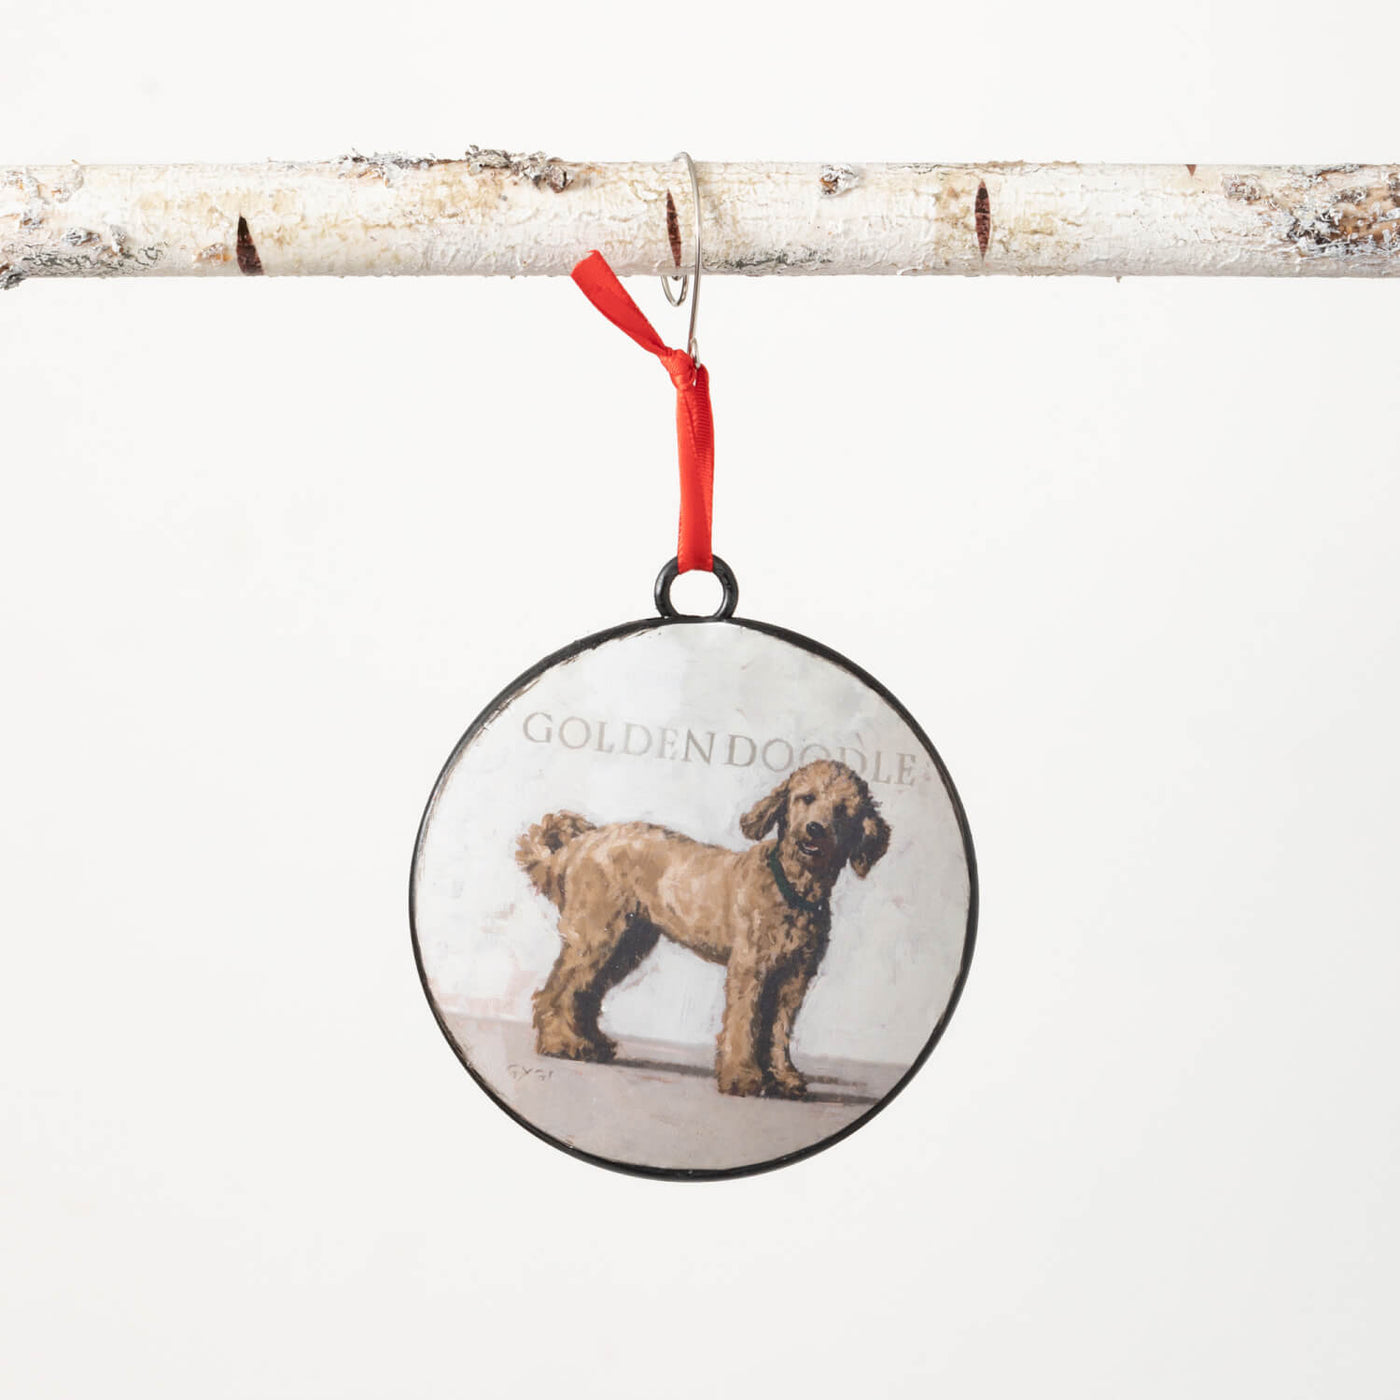 Round metal ornament with a portrait of a Goldendoodle on the front and a red back. Comes with a red ribbon for hanging.